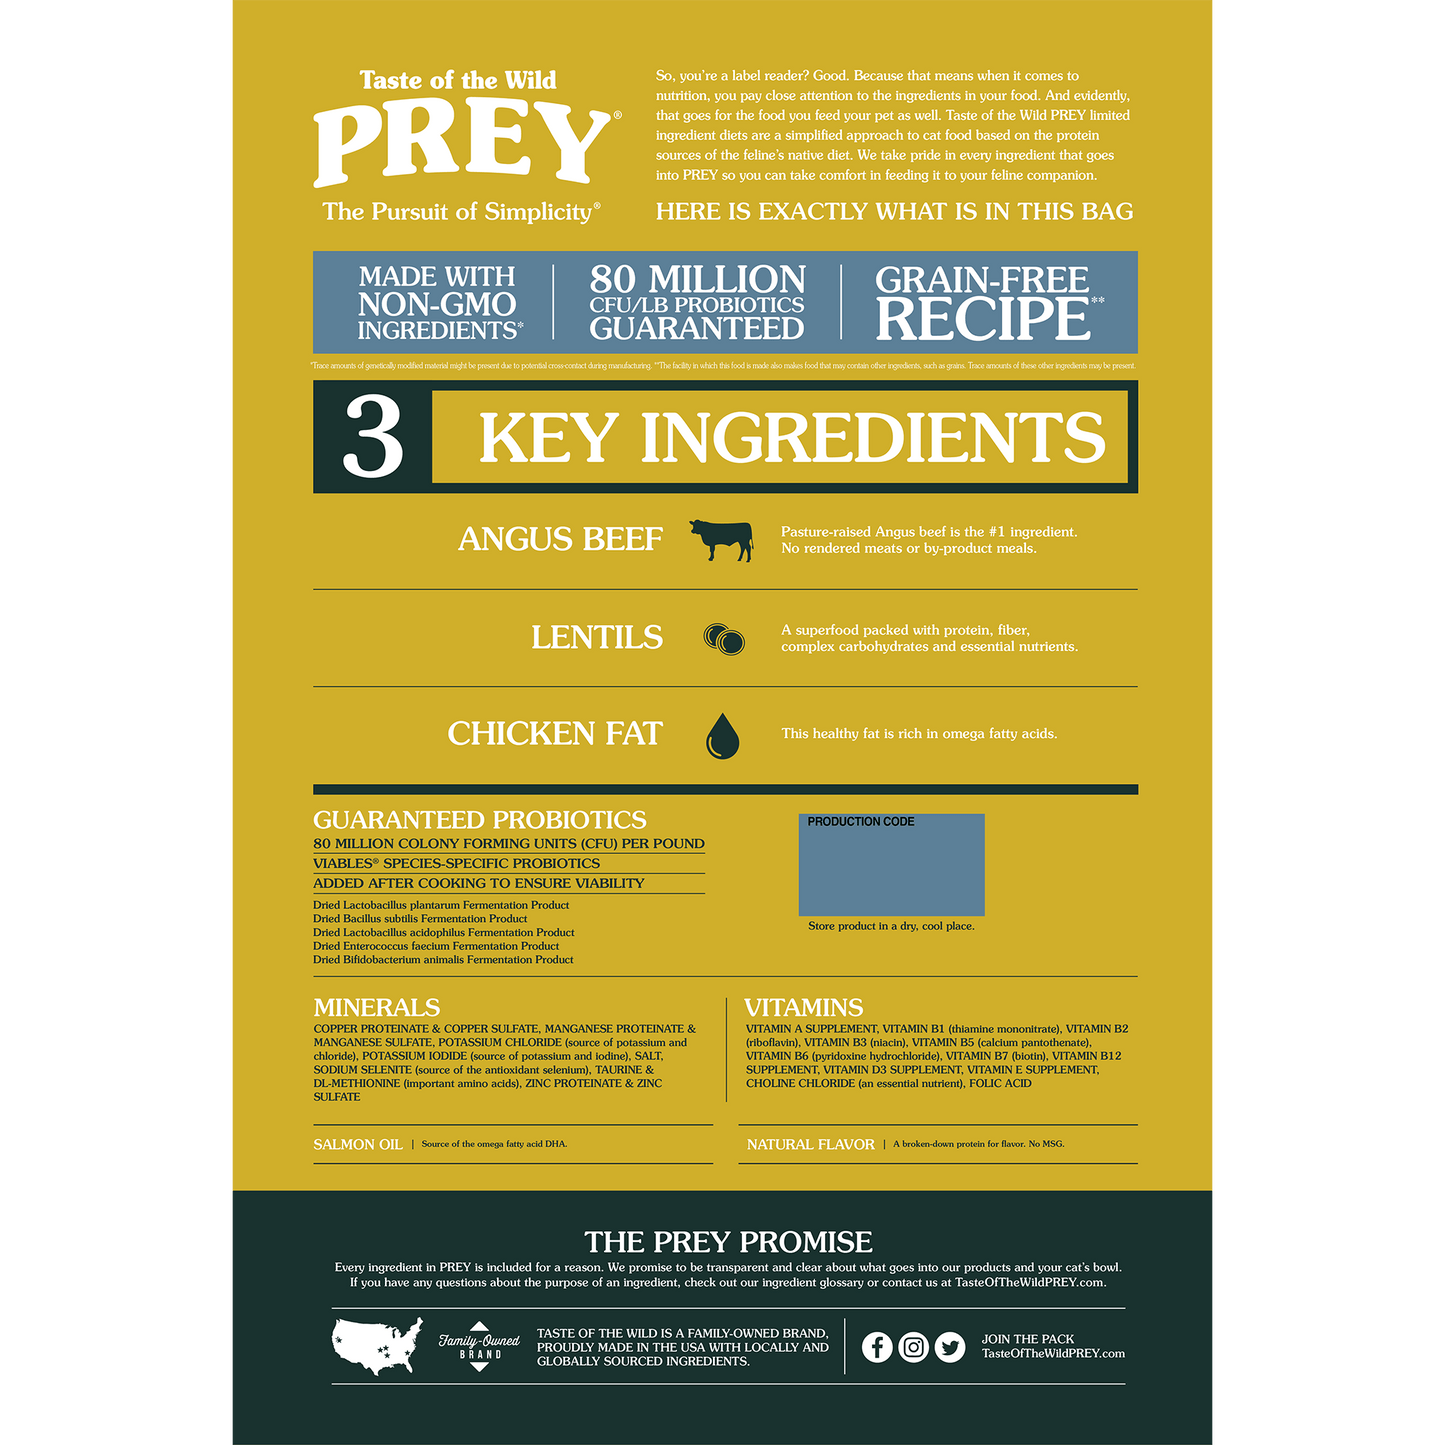 Taste of the Wild PREY Angus Beef Limited Ingredient Recipe for Cats - Pet Merit StoreTaste of the Wild PREY Angus Beef Limited Ingredient Recipe for Cats